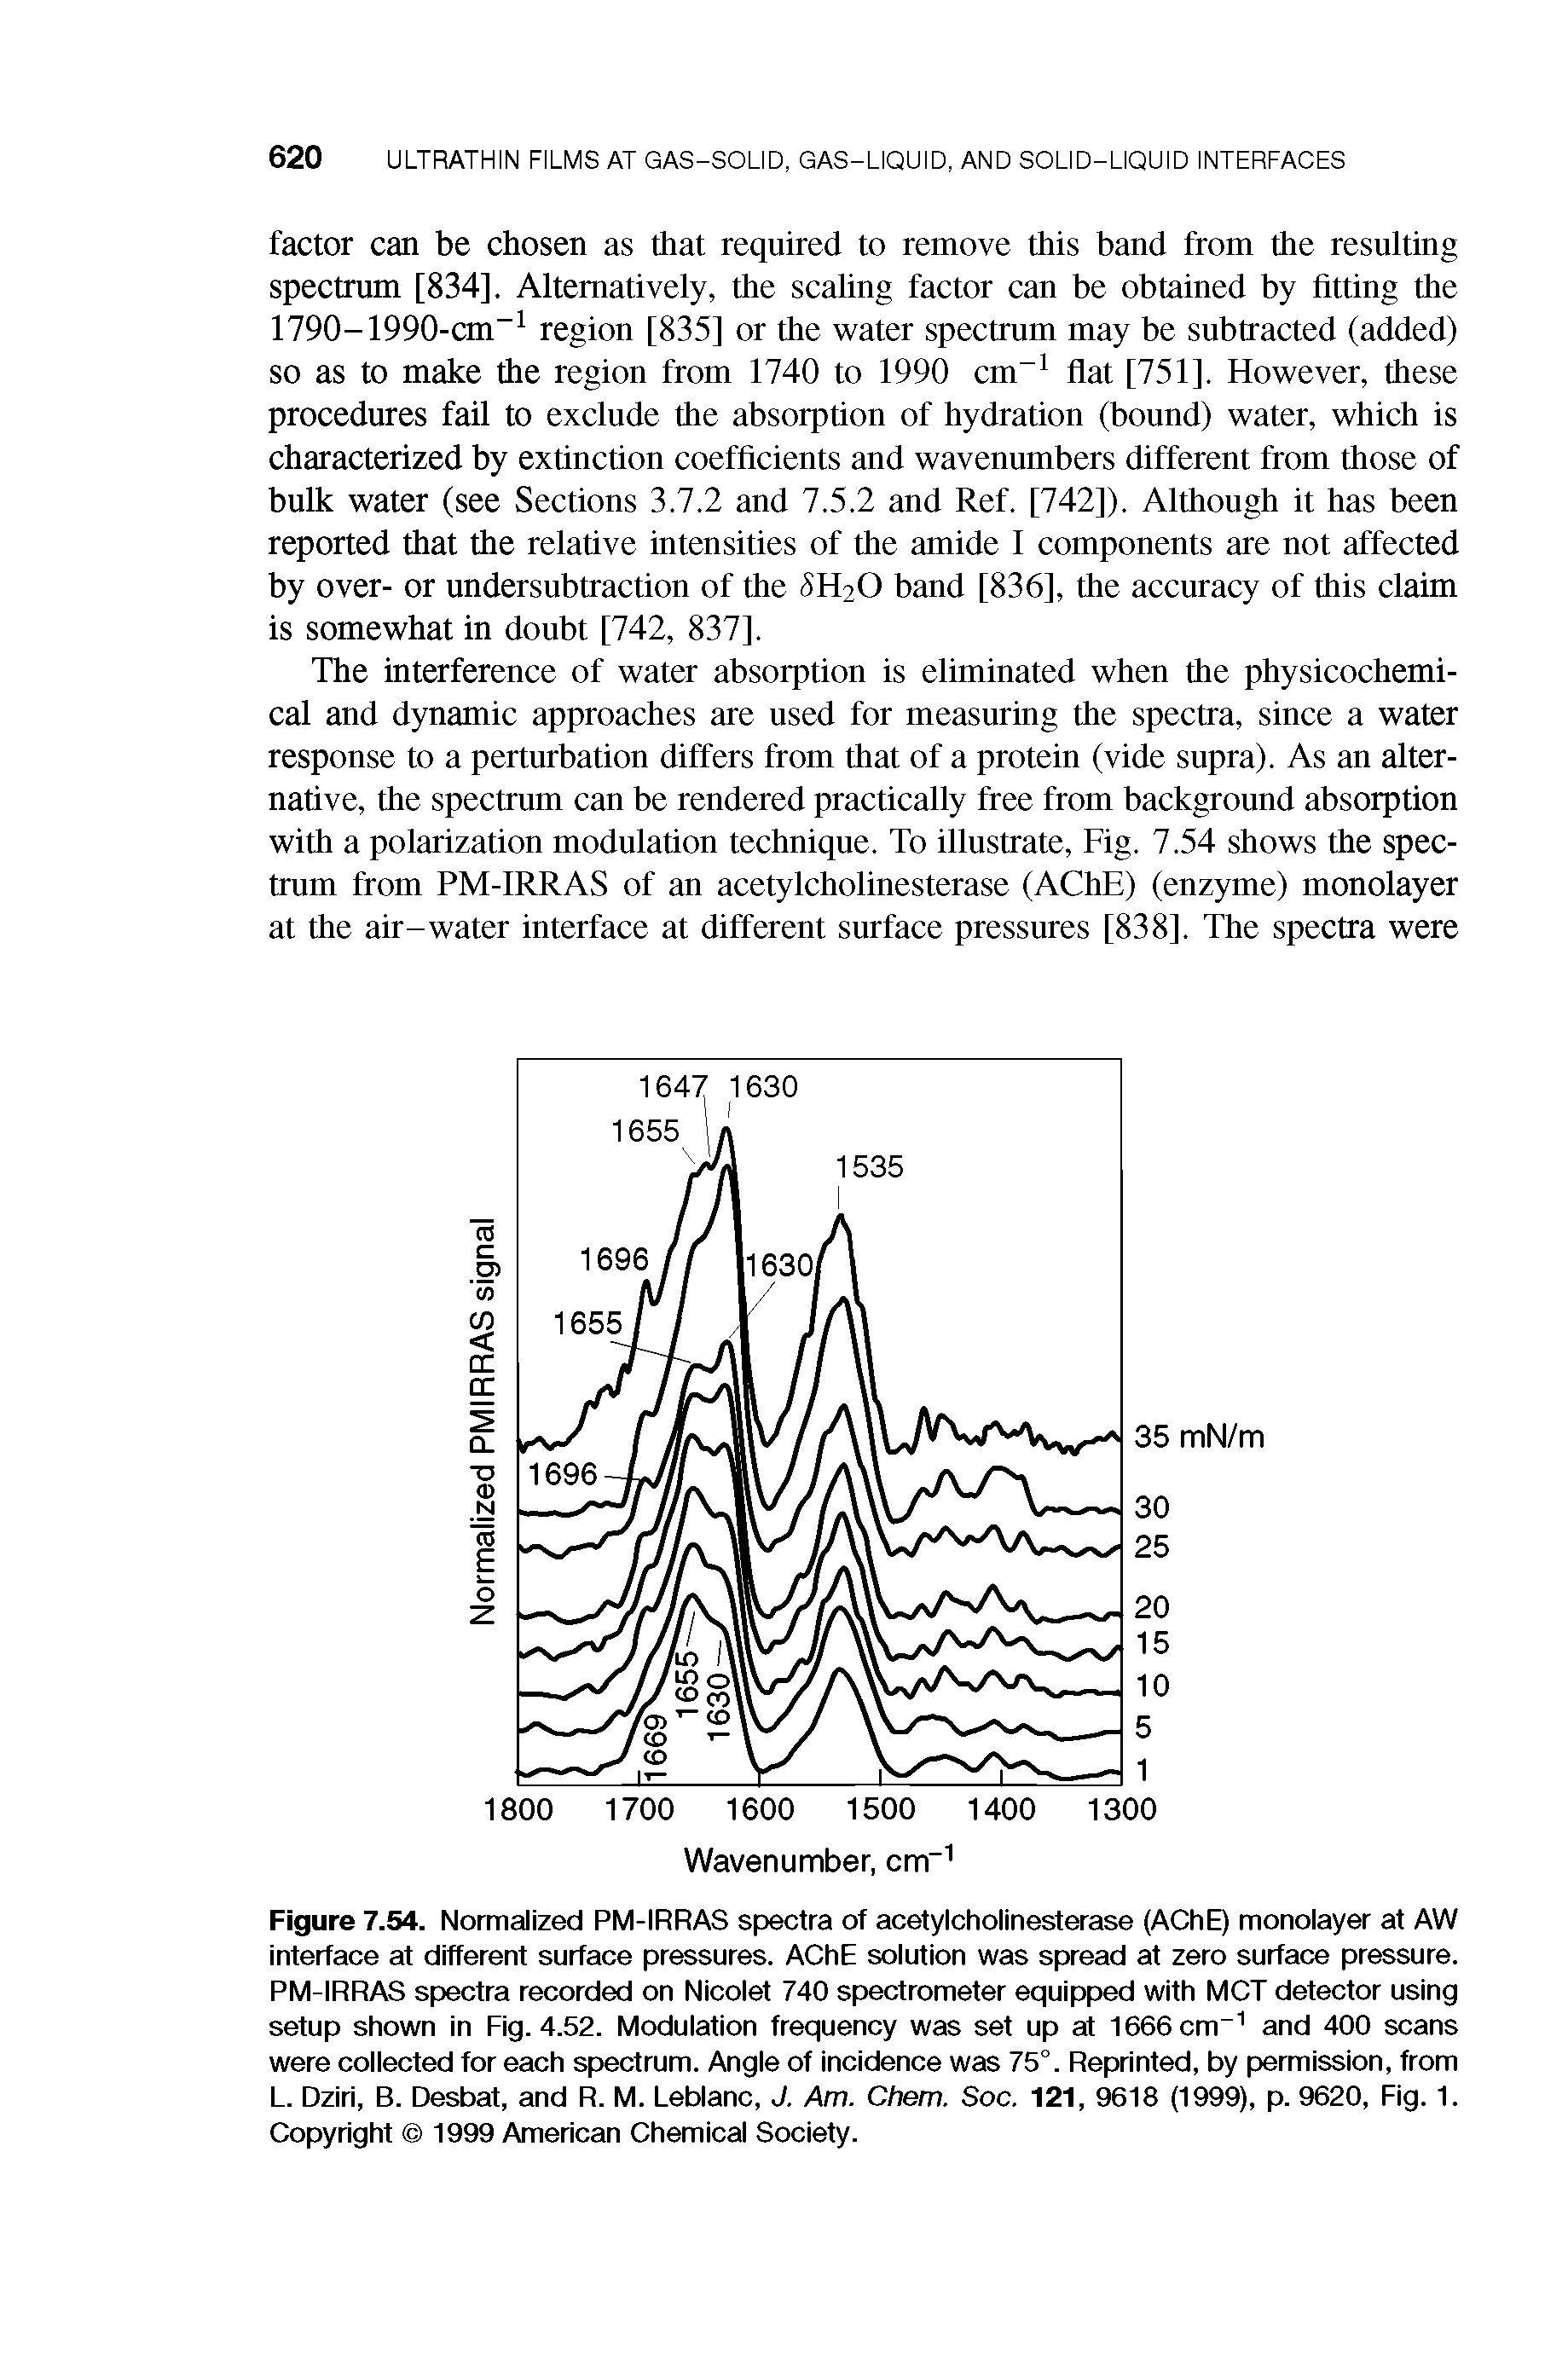 Figure 7.54. Normalized PM-IRRAS spectra of acetylcholinesterase (AChE) monolayer at AW interface at different surface pressures. AChE solution was spread at zero surface pressure. PM-IRRAS spectra recorded on Nicolet 740 spectrometer equipped with MCT detector using setup shown in Fig. 4.52. Modulation frequency was set up at 1666 cm and 400 scans were collected for each spectrum. Angle of incidence was 75°. Reprinted, by permission, from L. Dziri, B. Desbat, and R. M. Leblanc, J. Am. Chem. Soc. 121, 9618 (1999), p. 9620, Fig. 1. Copyright 1999 American Chemical Society.